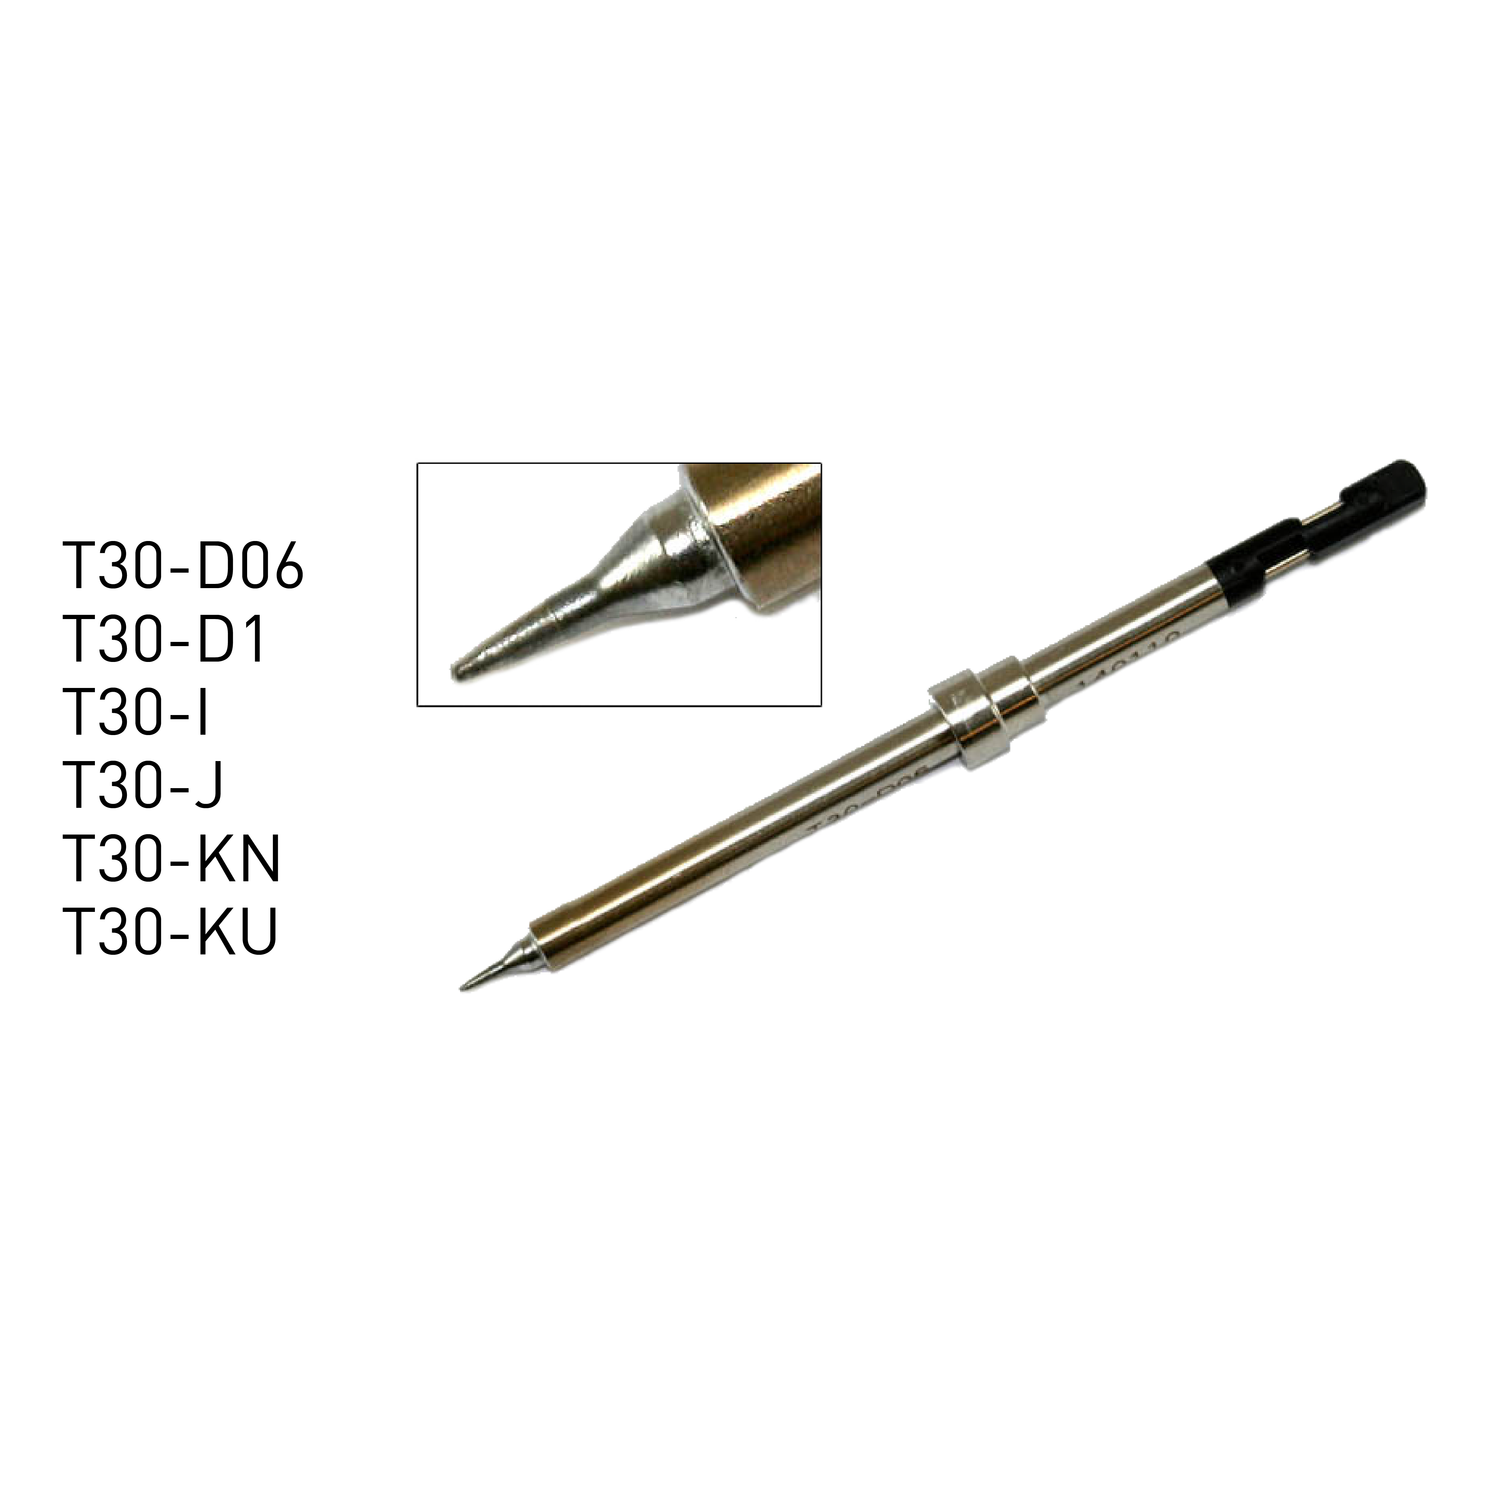 Hakko FM2032 micro soldering iron replacement tips T30 with N2 soldering option available